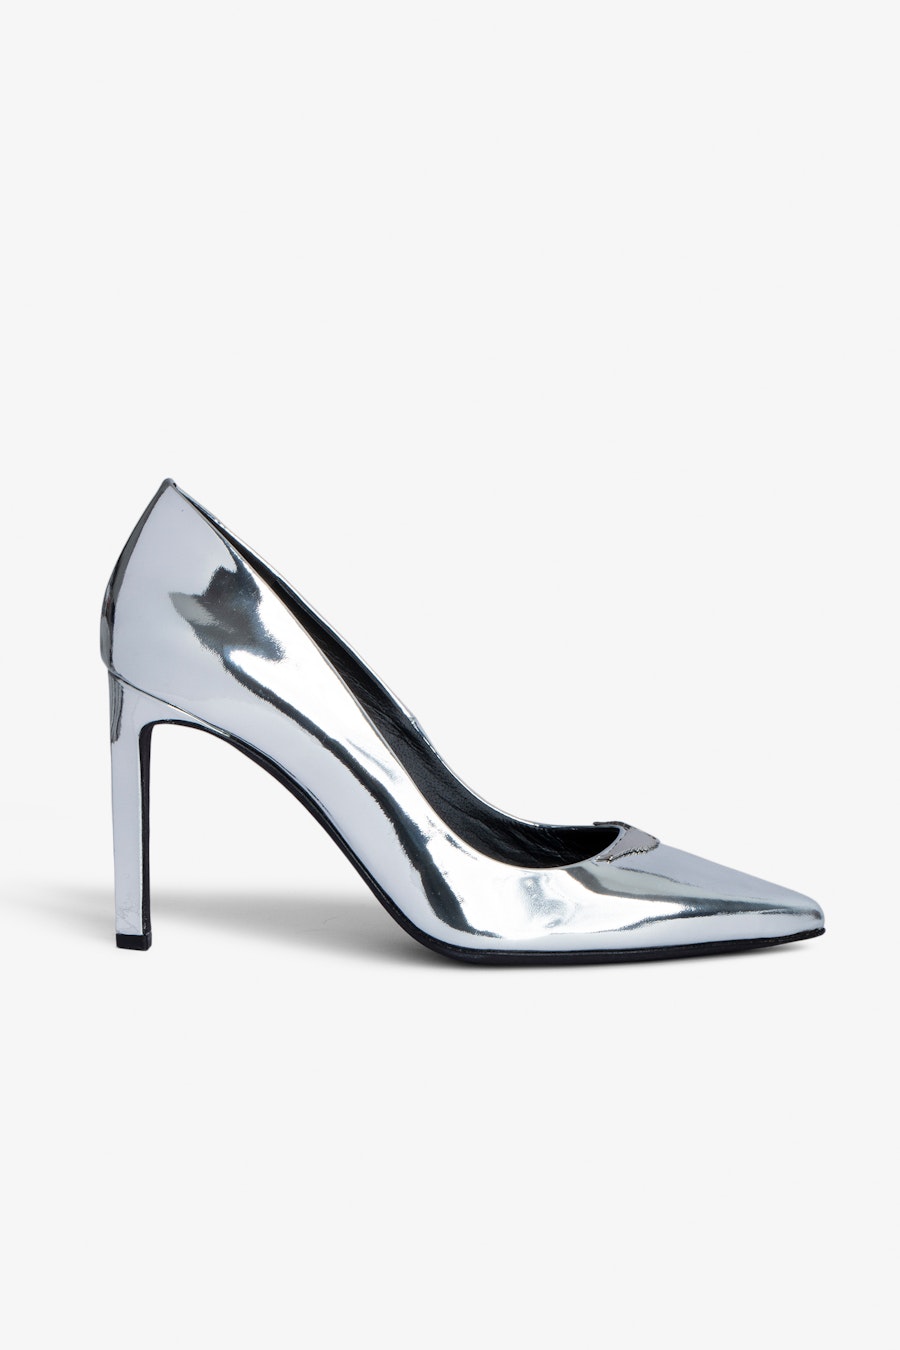 ZADIG&VOLTAIRE Perfect Court Shoes